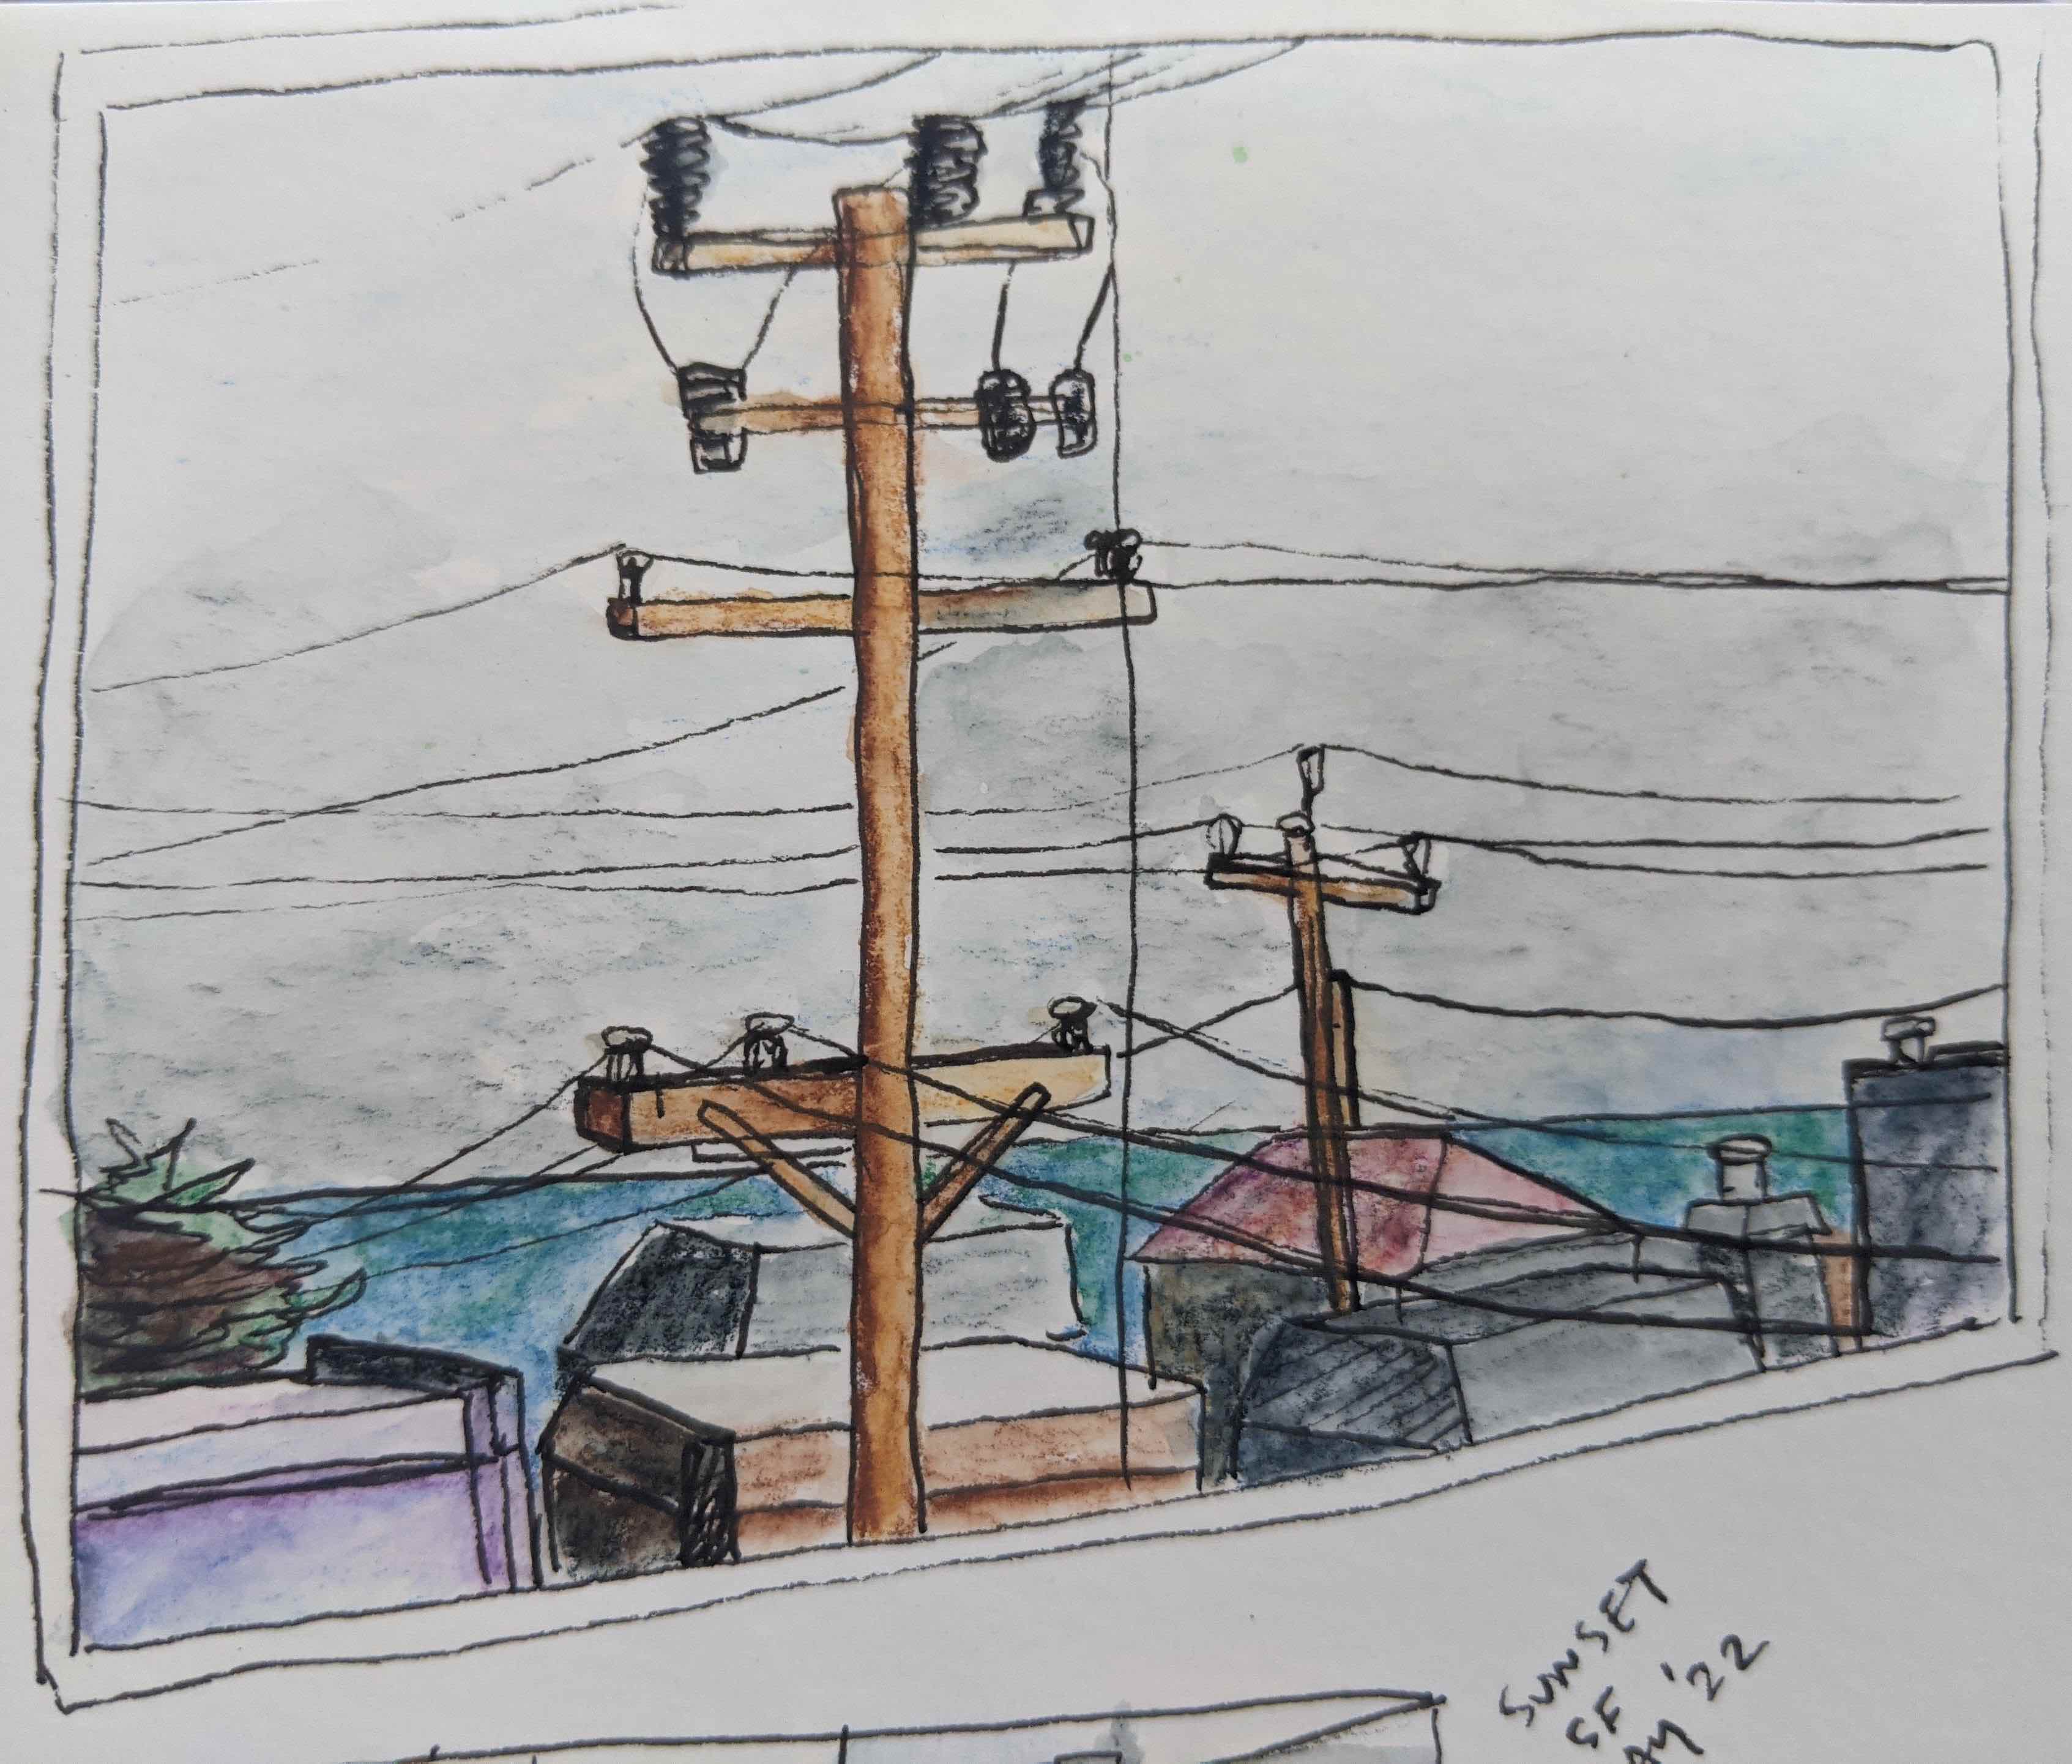 Sketch over looking the Sunset neighborhood in San Francisco